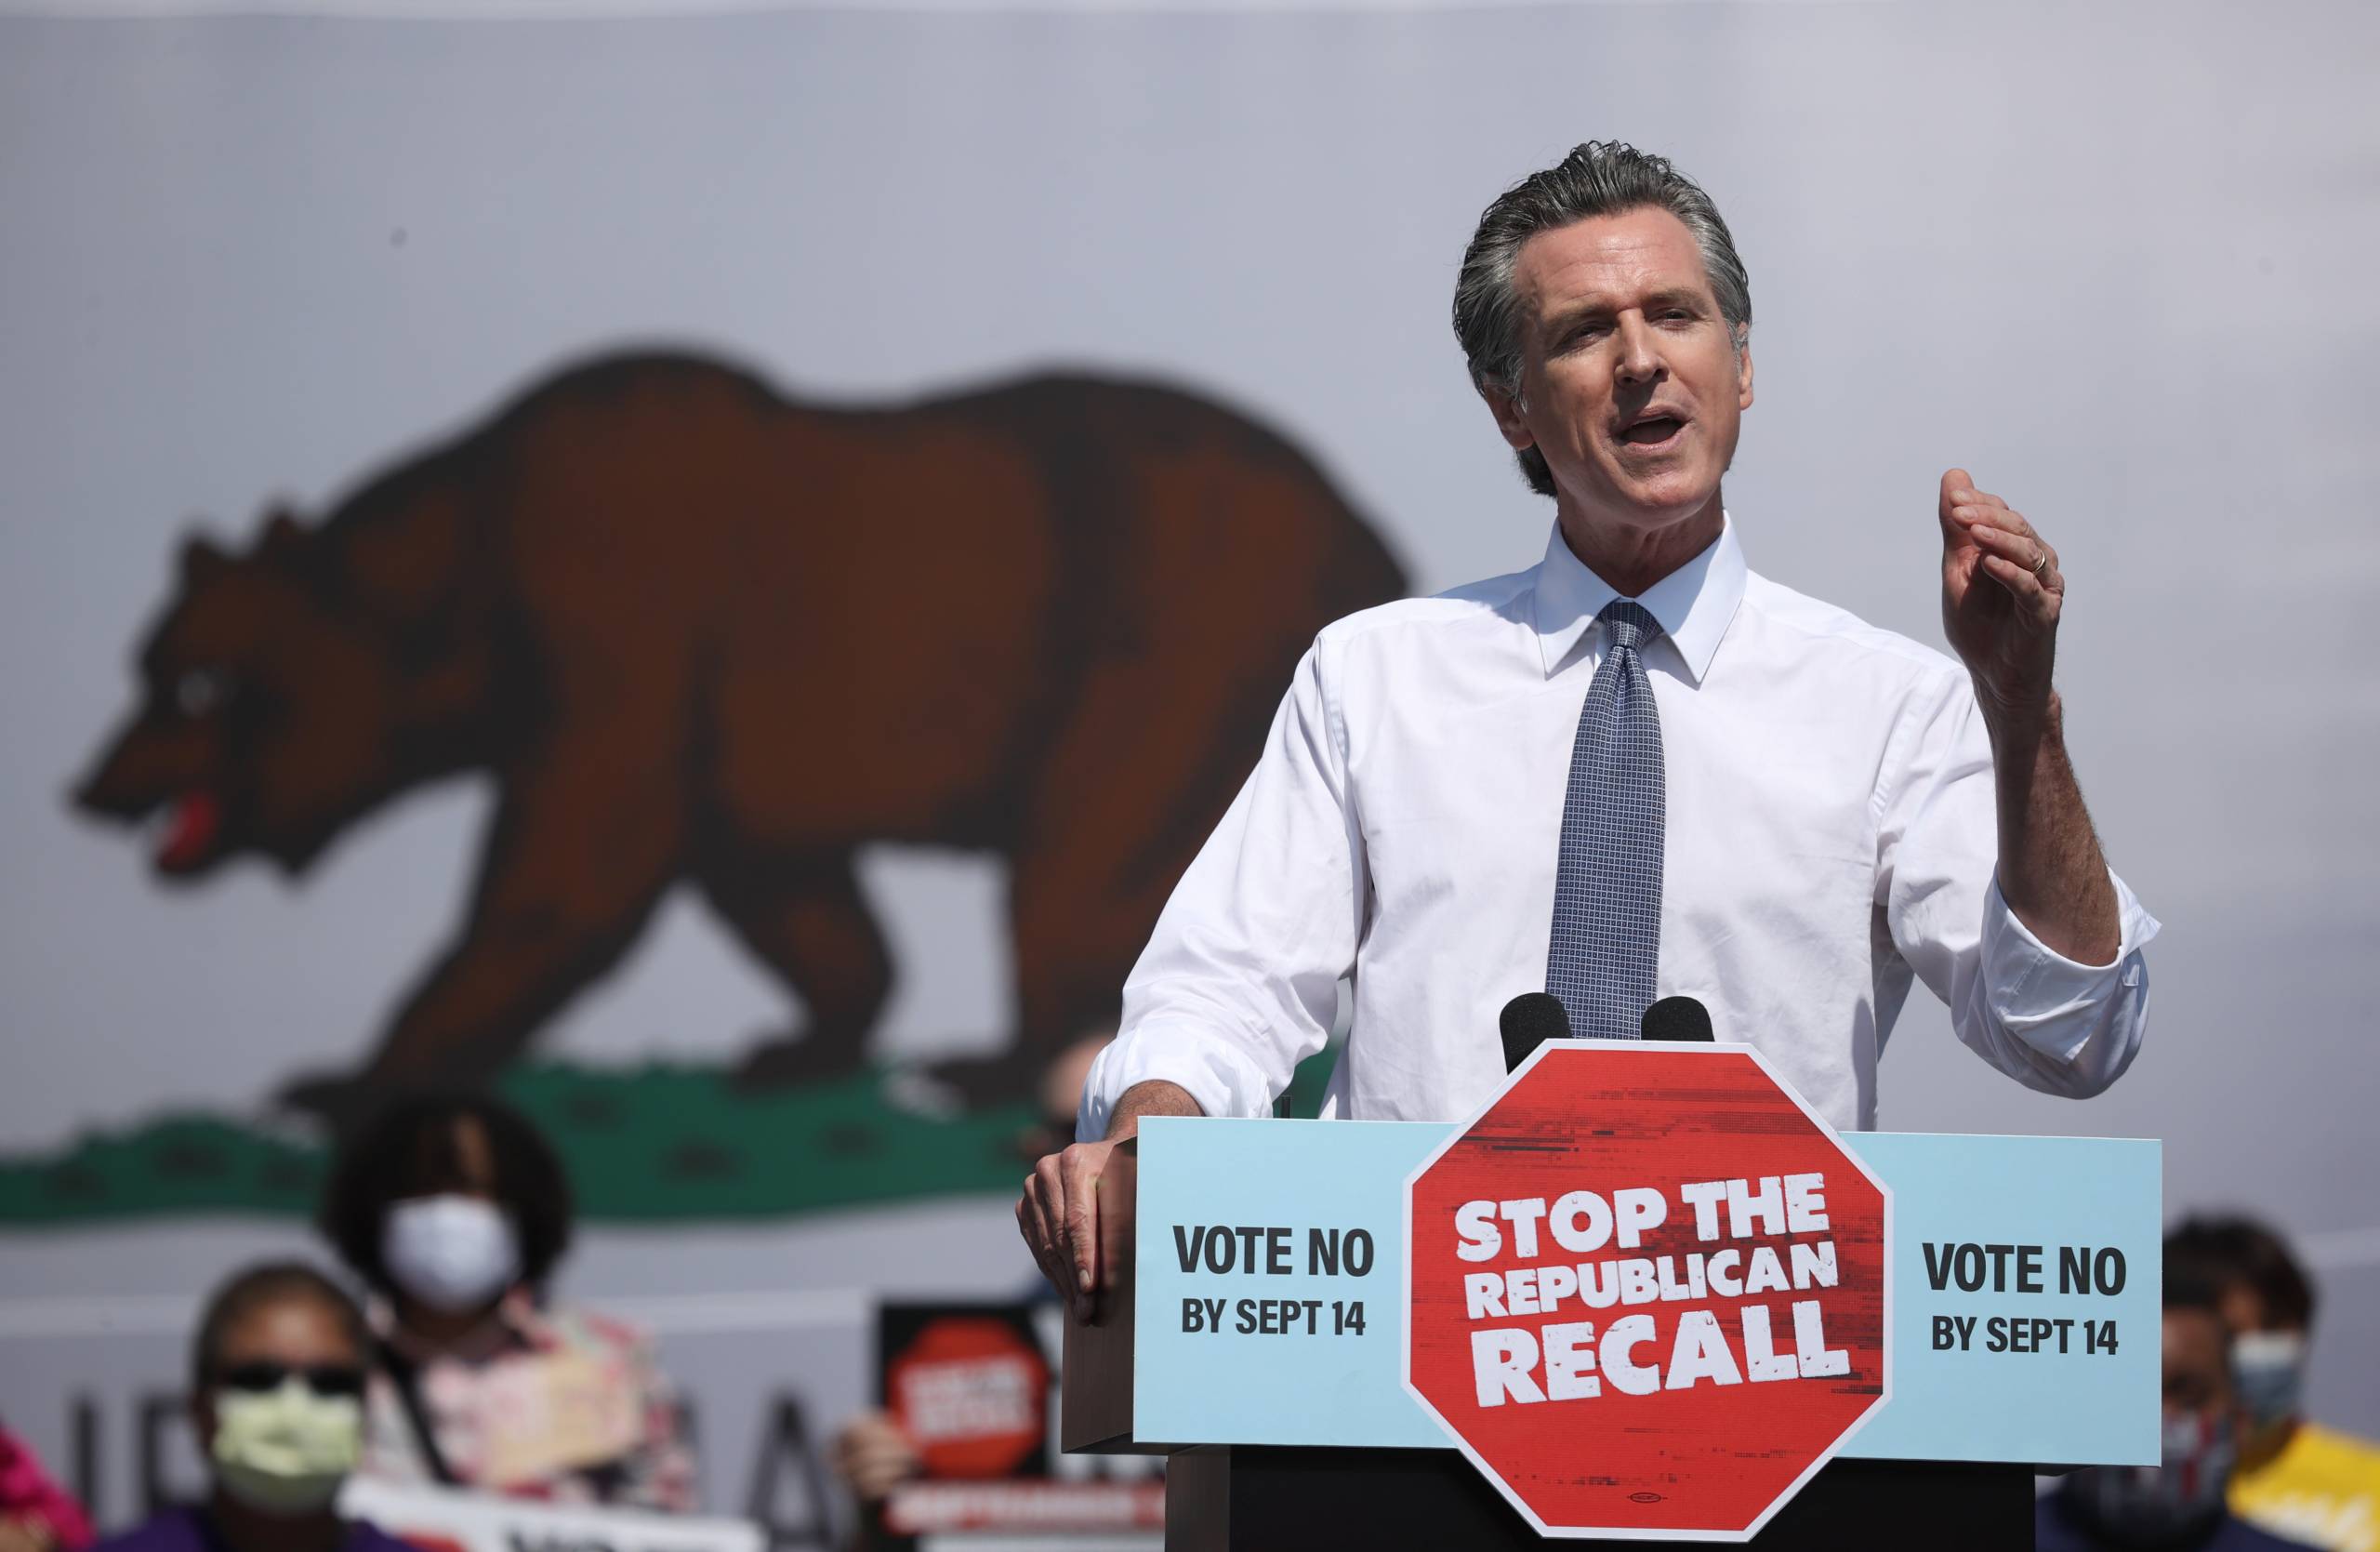 Gov. Newsom gestures behind a podium in front of a massive California flag.